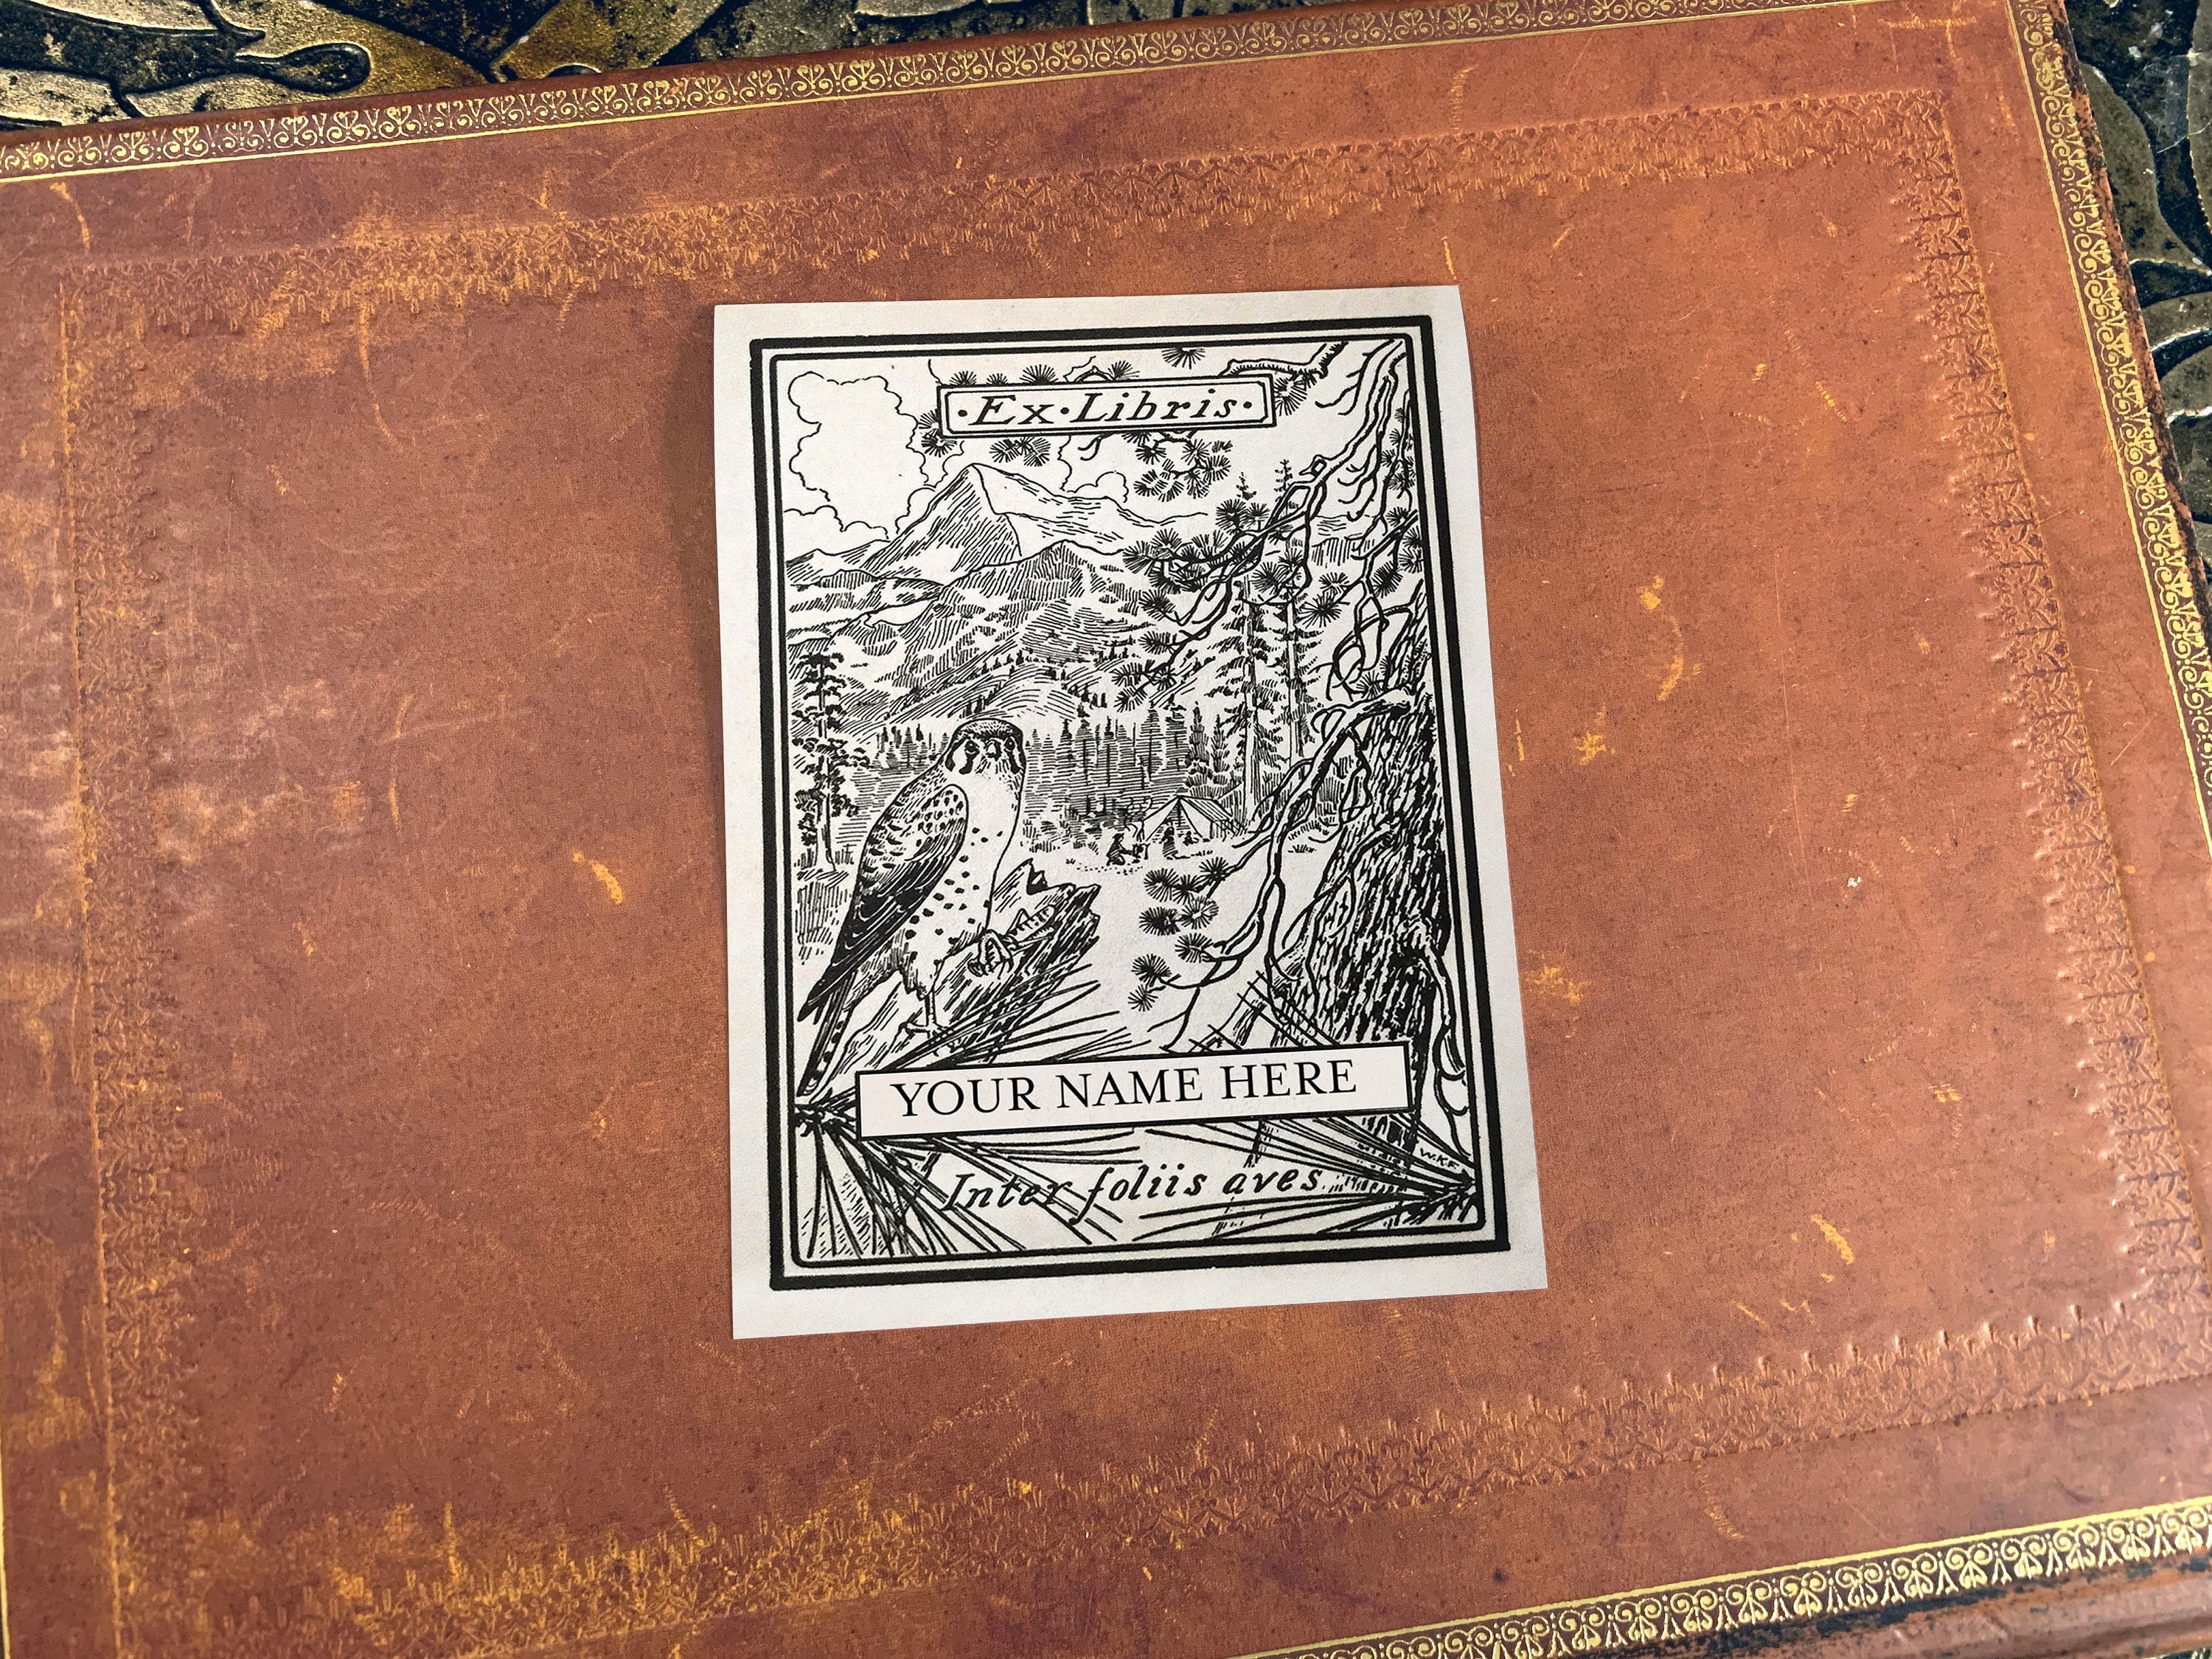 Regal Hawk, Personalized, Ex-Libris Bookplates, Crafted on Traditional Gummed Paper, 3in x 4in, Set of 30